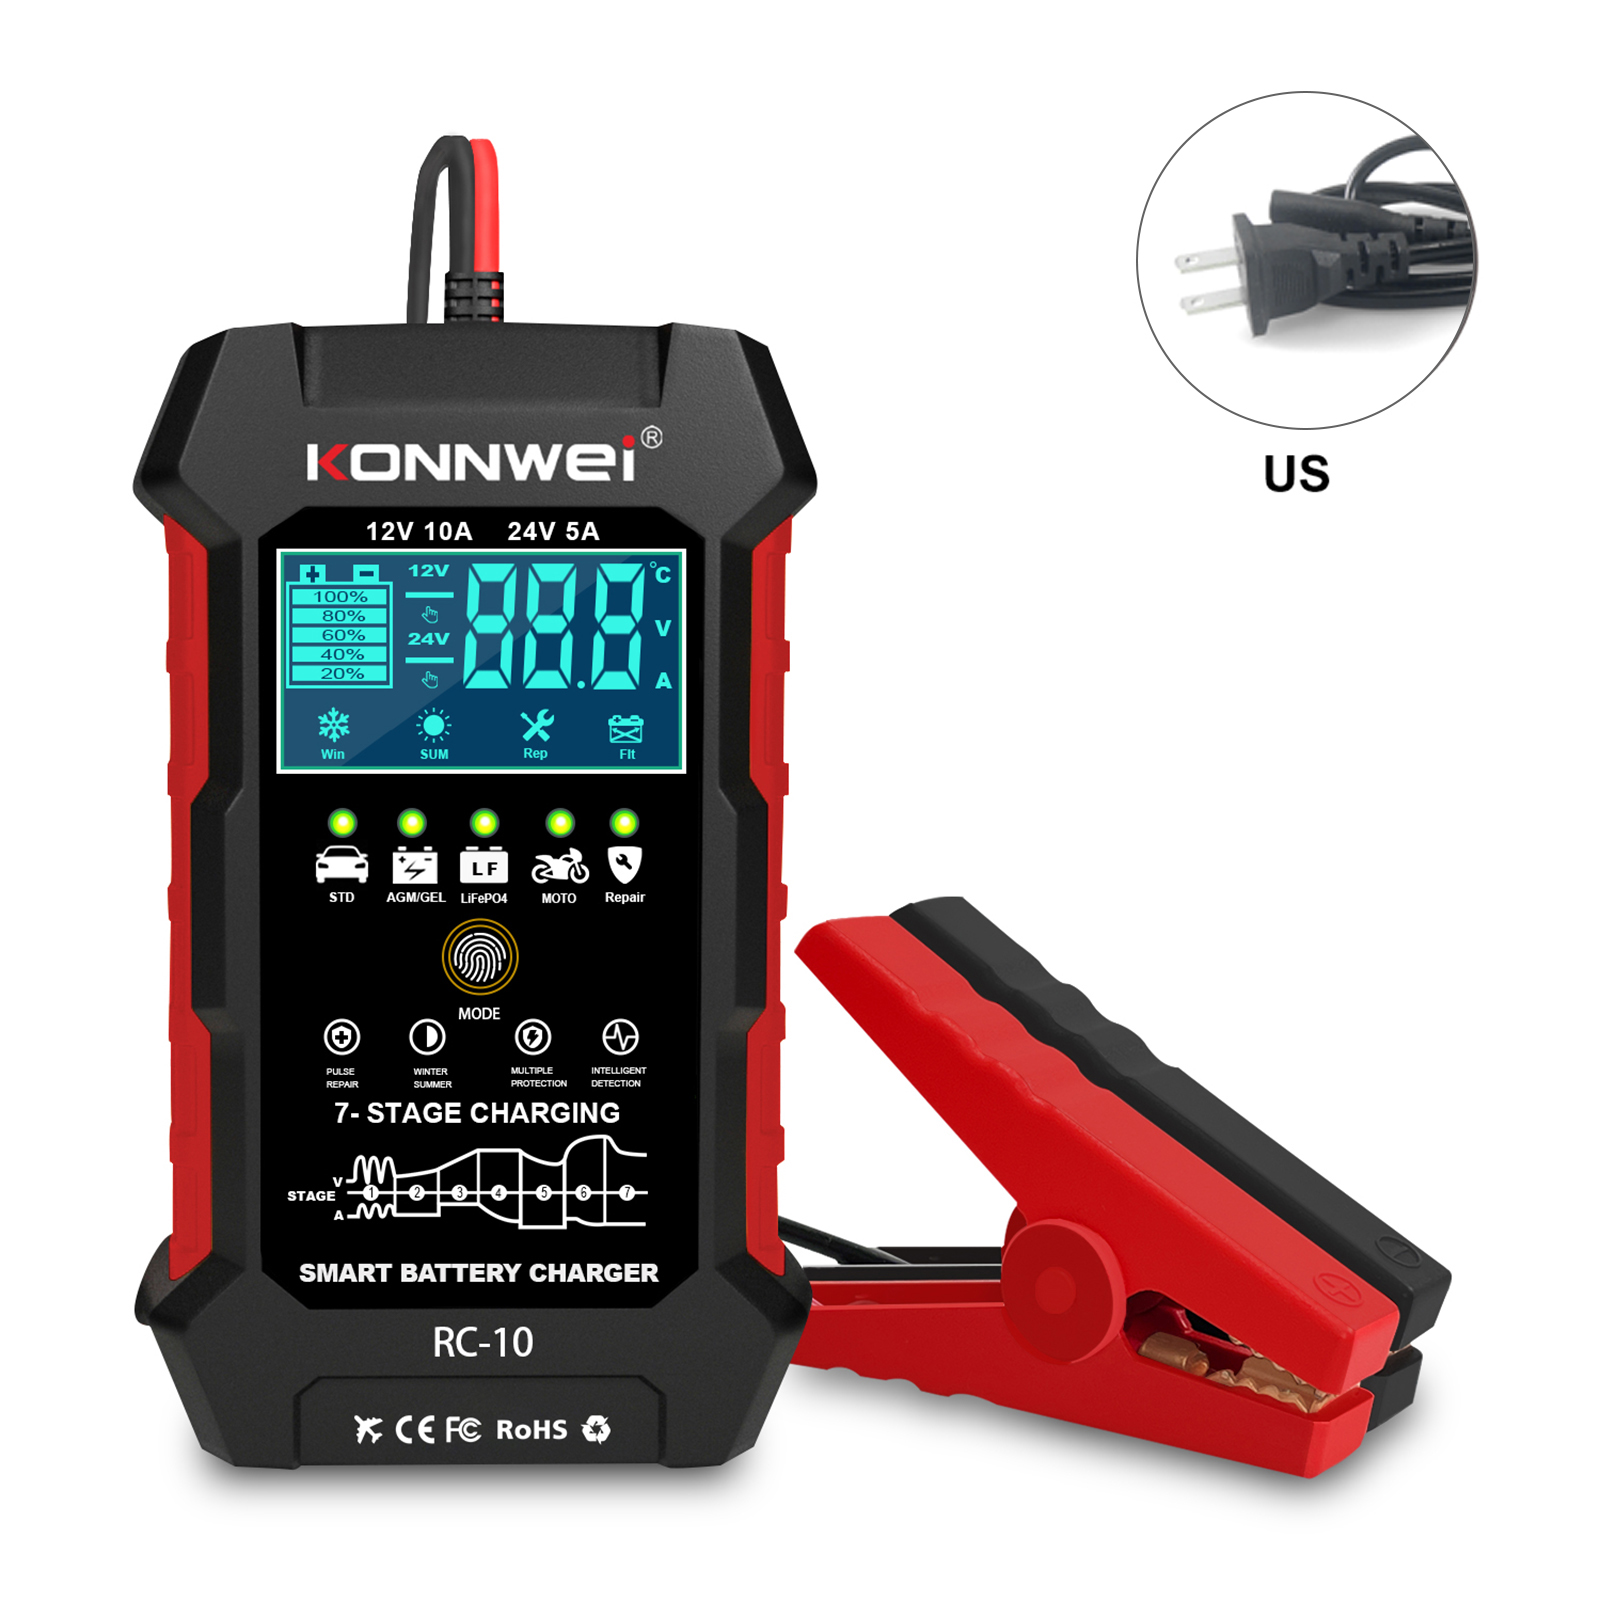 KONNWEI RC-10 Batter y Charger Efficient and Portable Tool for Lead